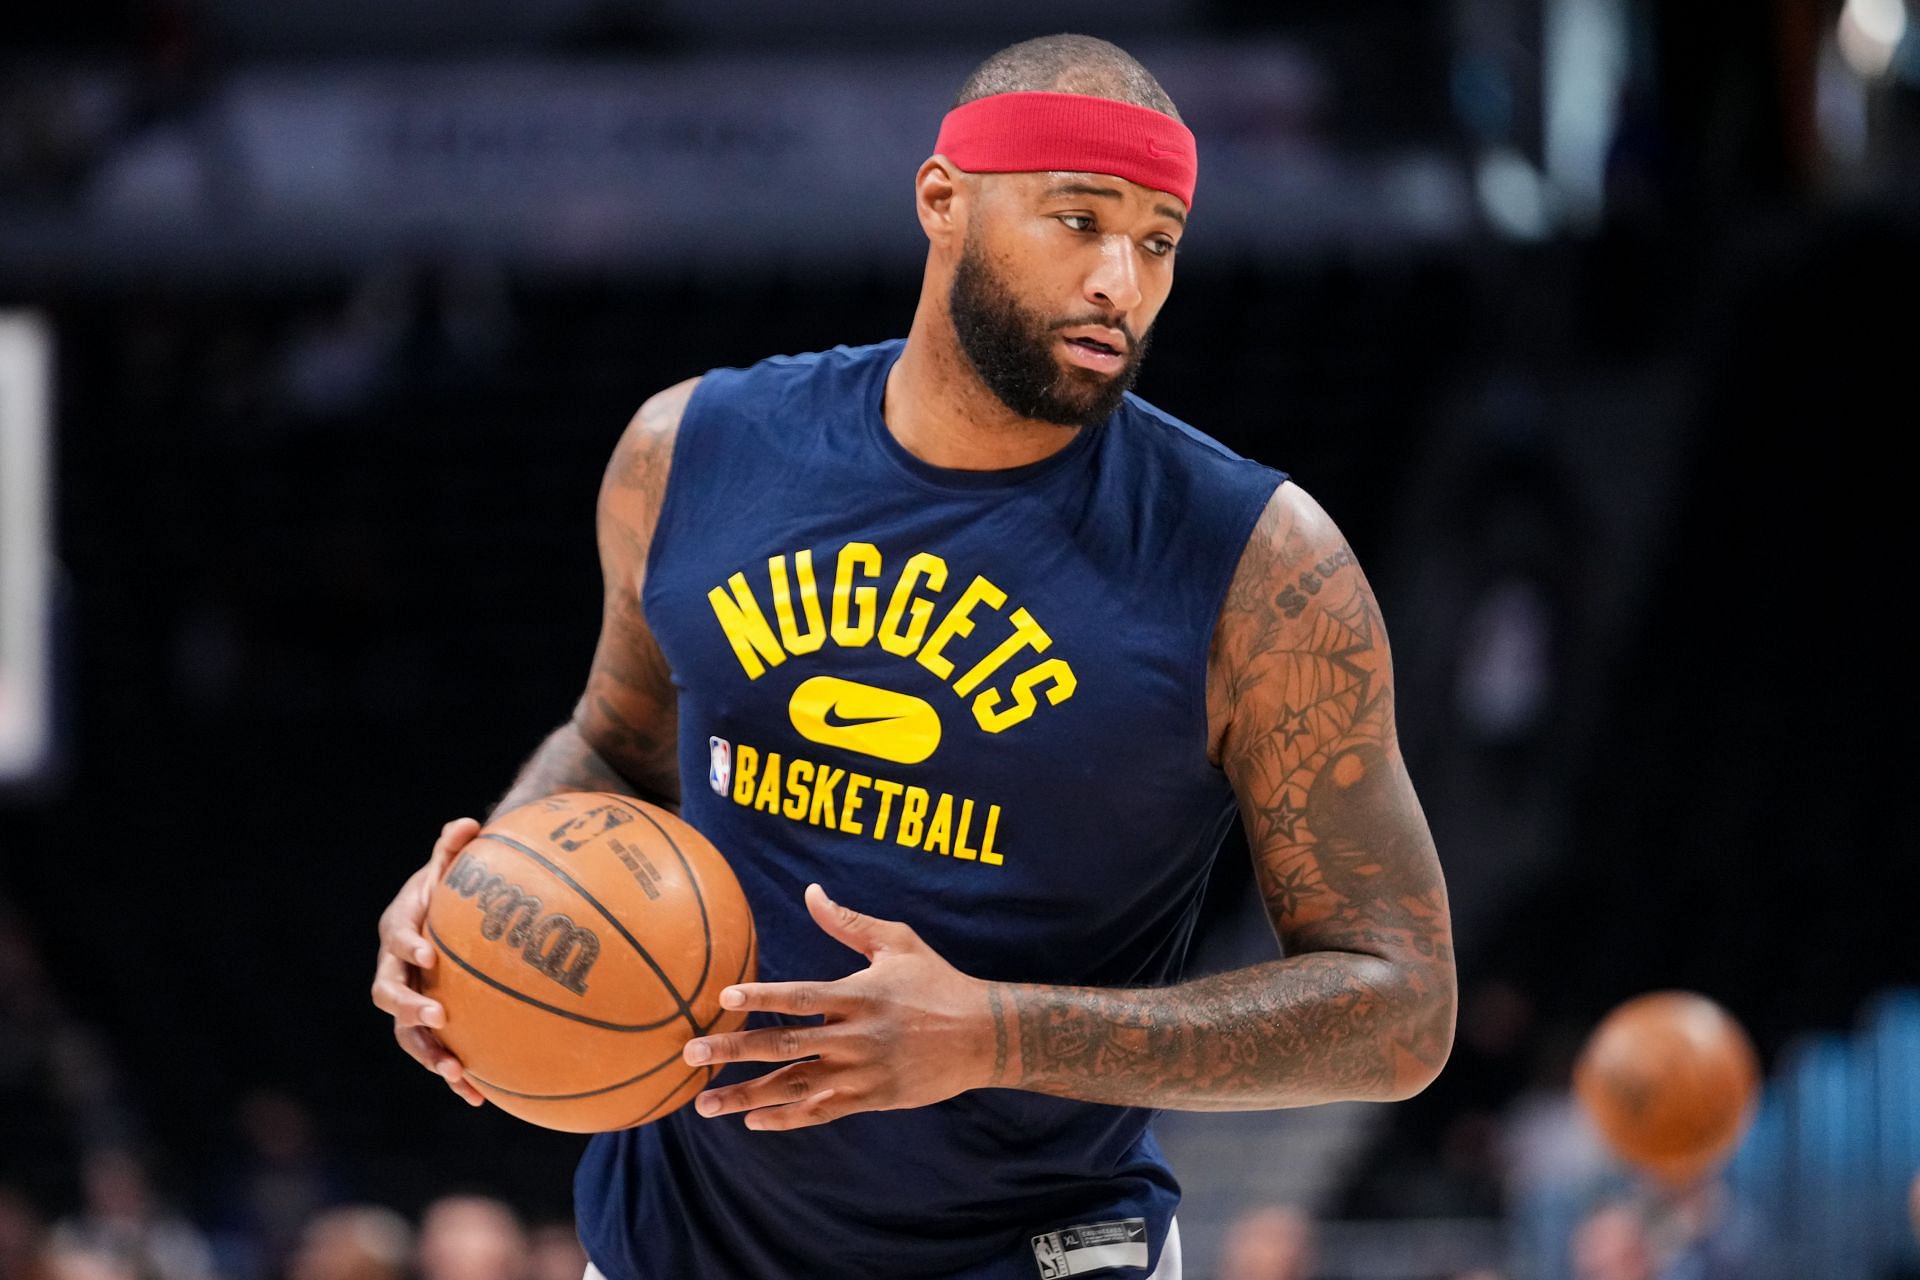 DeMarcus Cousins of the Denver Nuggets